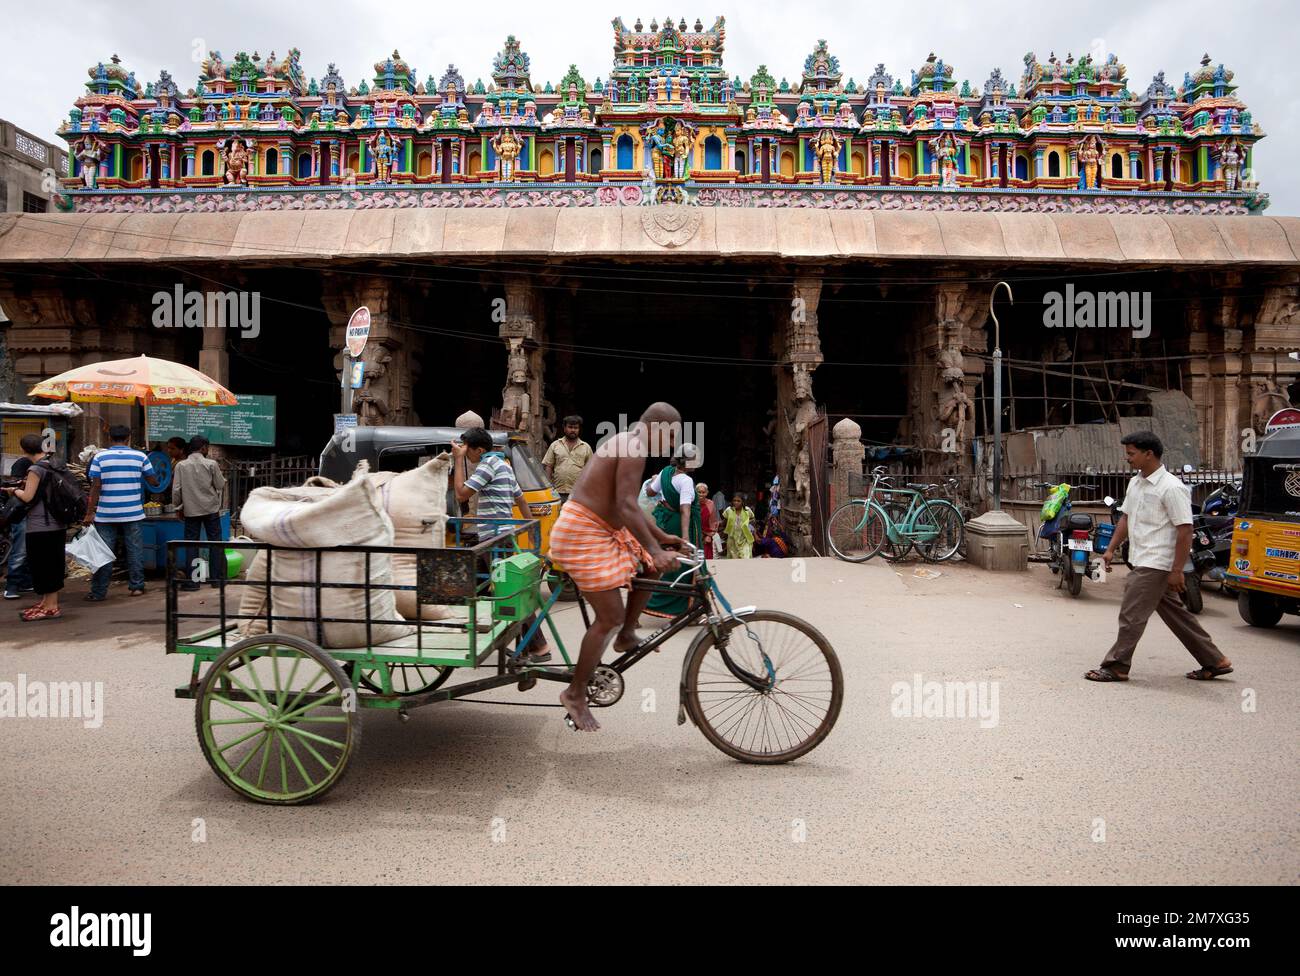 adurai, India-September 11, 2012. A street in front of the the Sri Meenakshi Hindu Temple where many parishioners and pilgrims visit every day Stock Photo